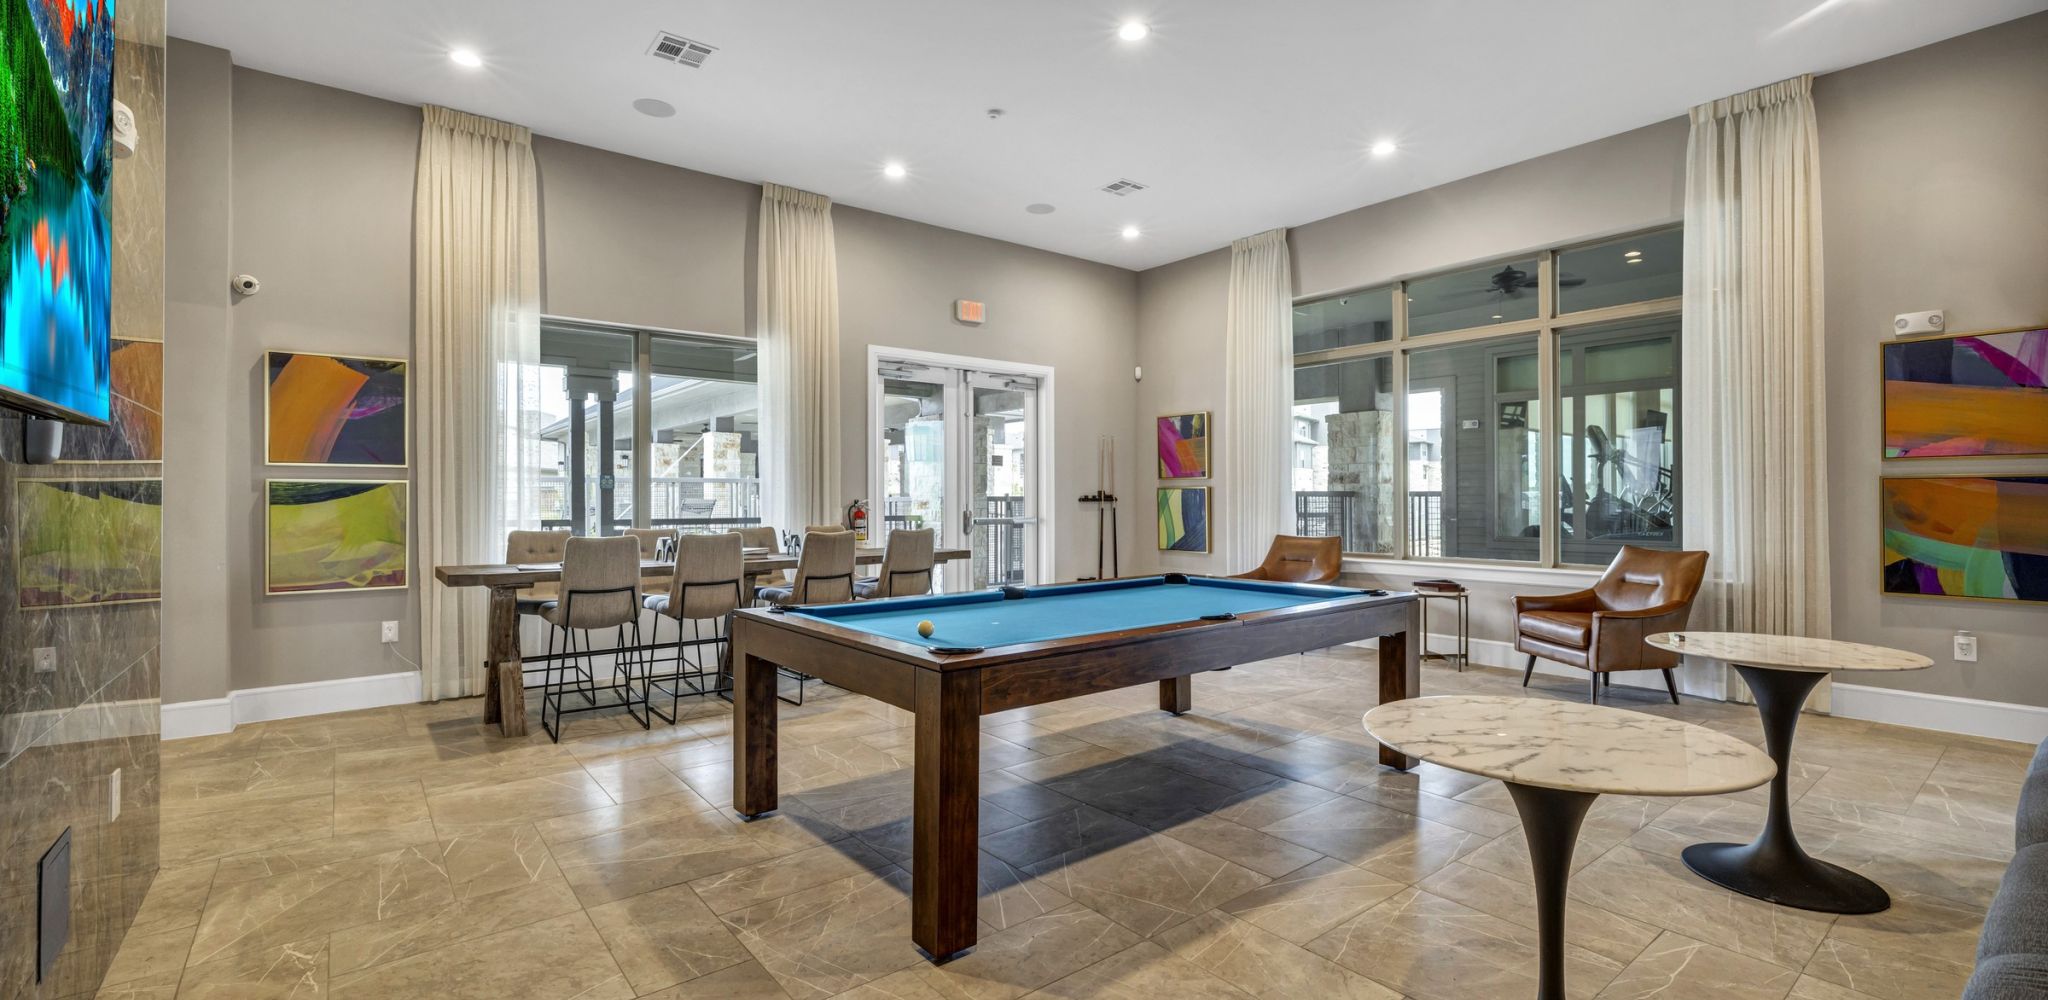 Hawthorne at Blanco Riverwalk amenity lounge area with pool table and entertainment space with tables and chairs